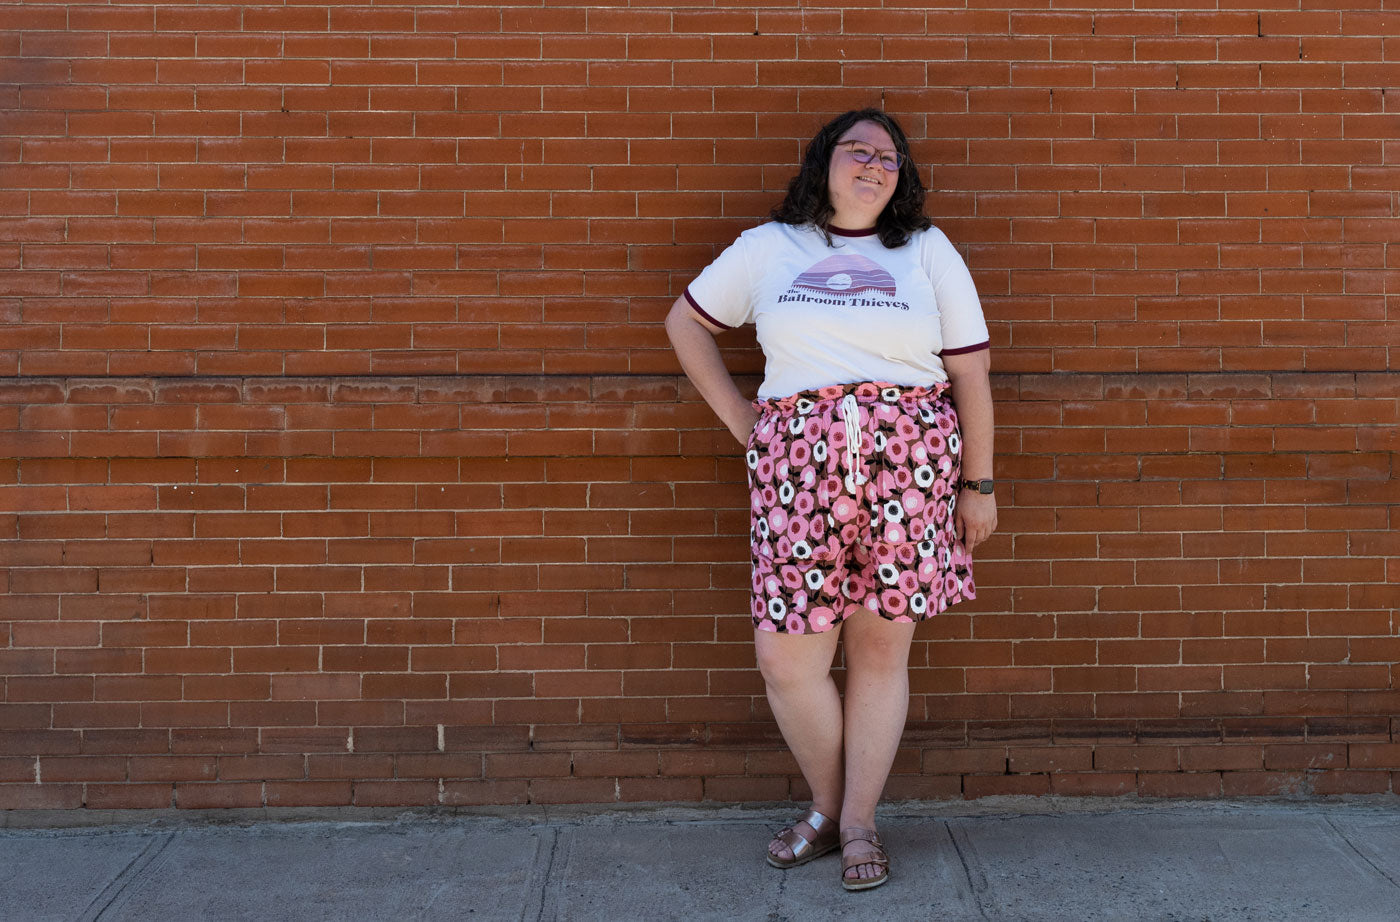 Kim wears her Soline Shorts made from a bright pink floral barkcloth fabric. She is wearing a white graphic t-shirt and stands in front of a brick wall.  